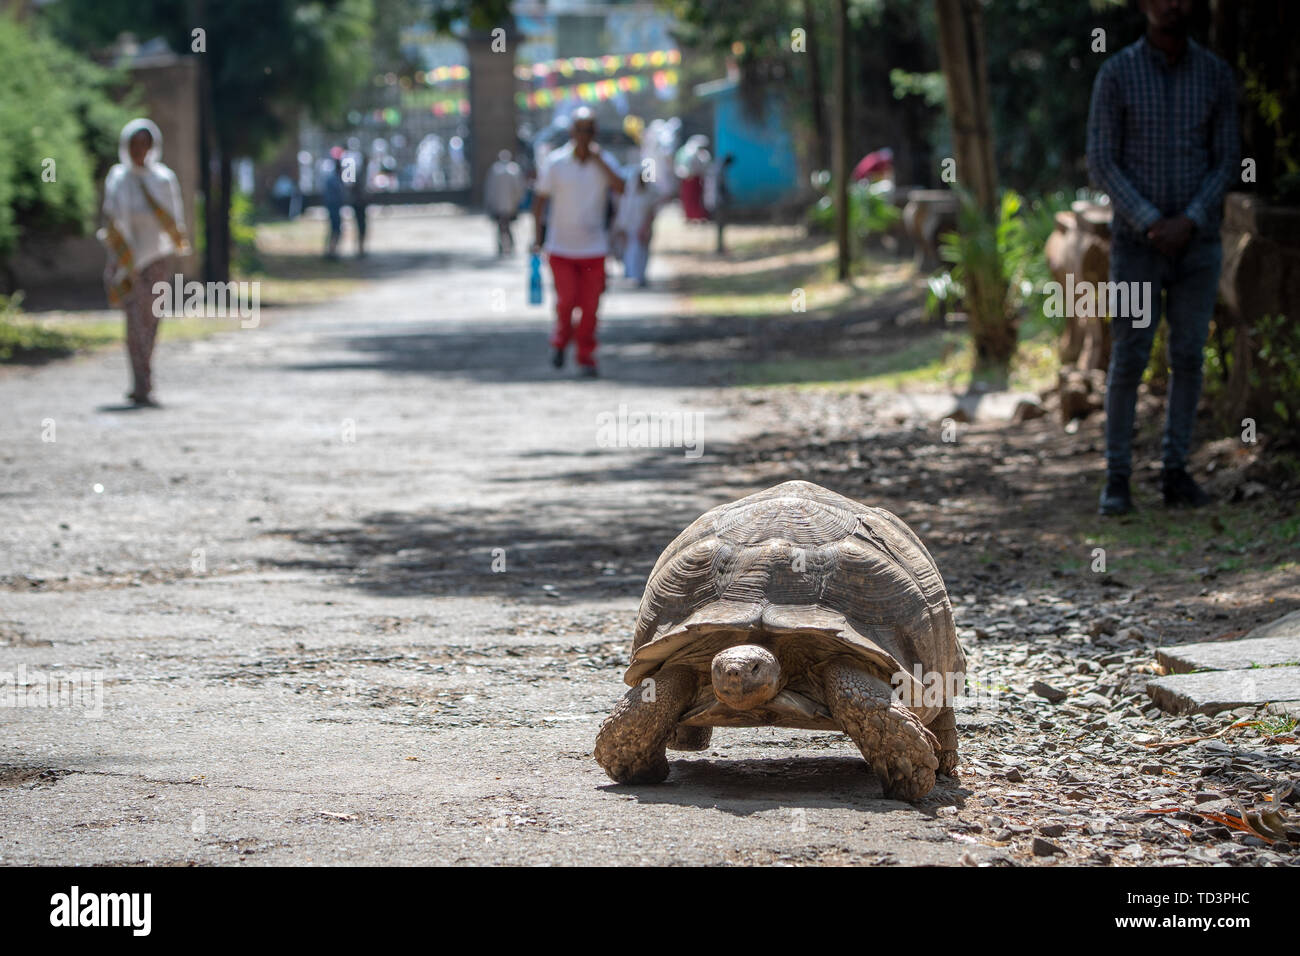 A large tortoise meanders down a dirt path in Addis Ababa, Ethiopia Stock Photo